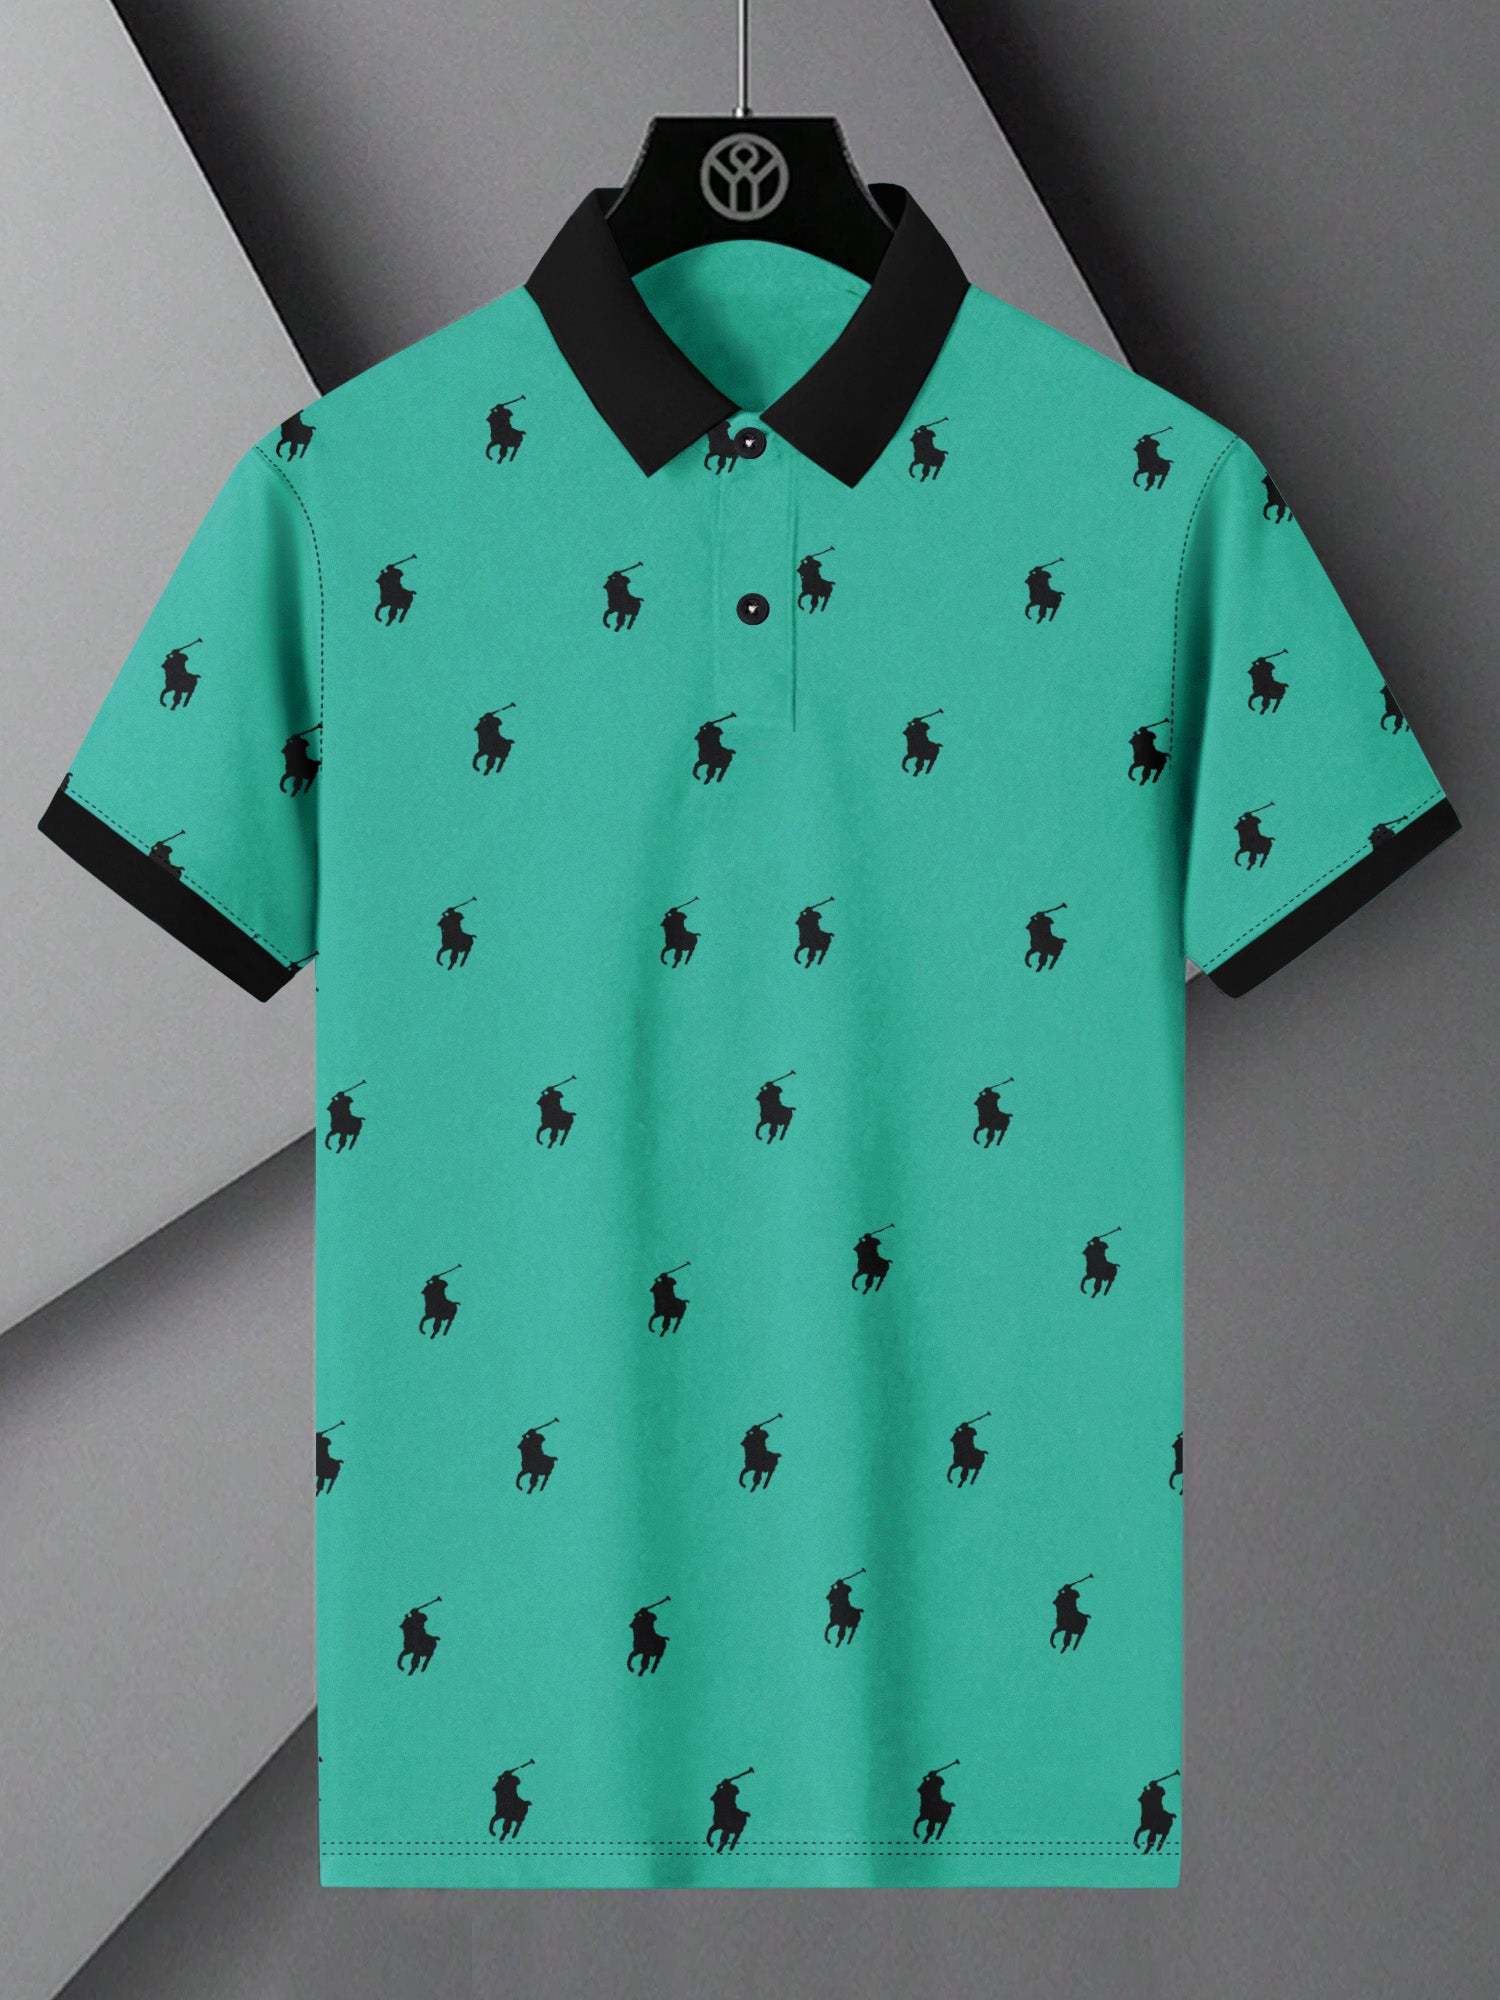 PRL Summer Polo Shirt For Men-Cyan Green with Allover Print-BE697/BR12950